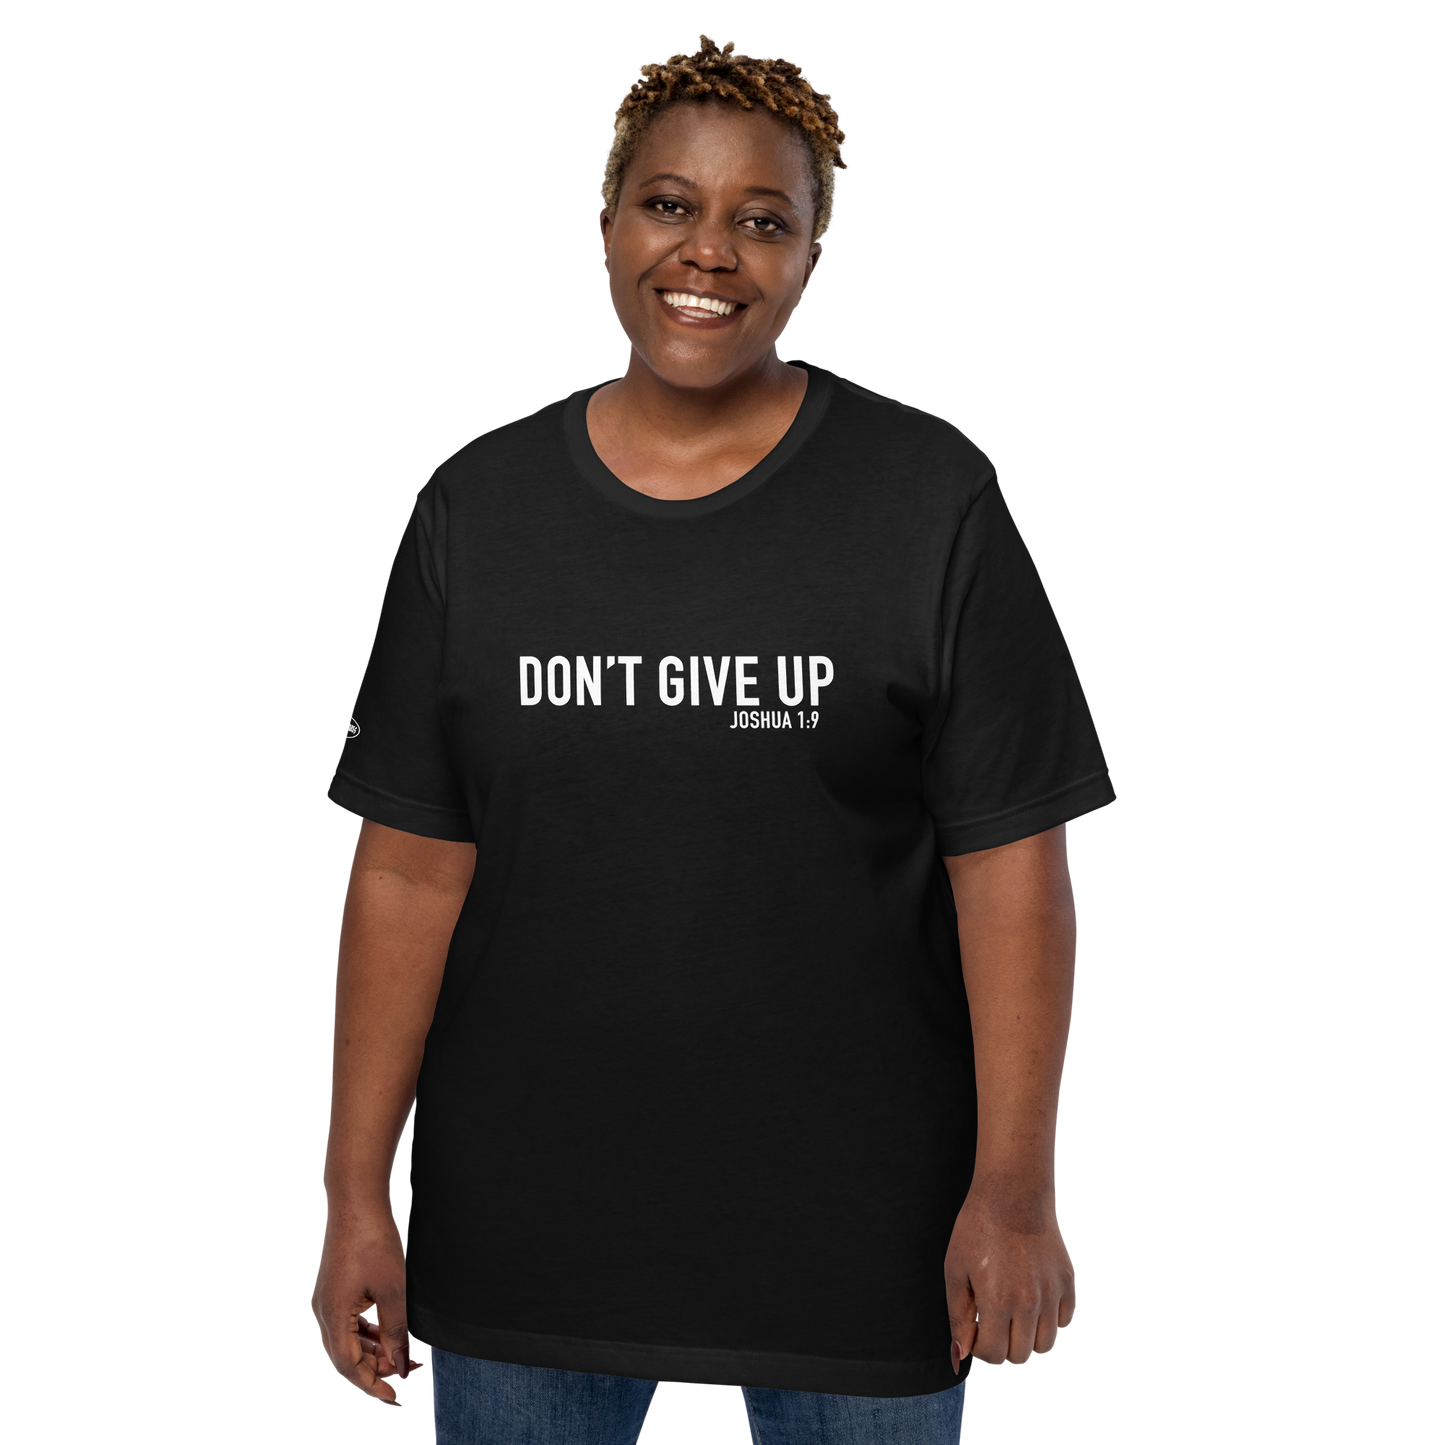 CHRISTIAN - Don't Give Up - Joshua 1:9